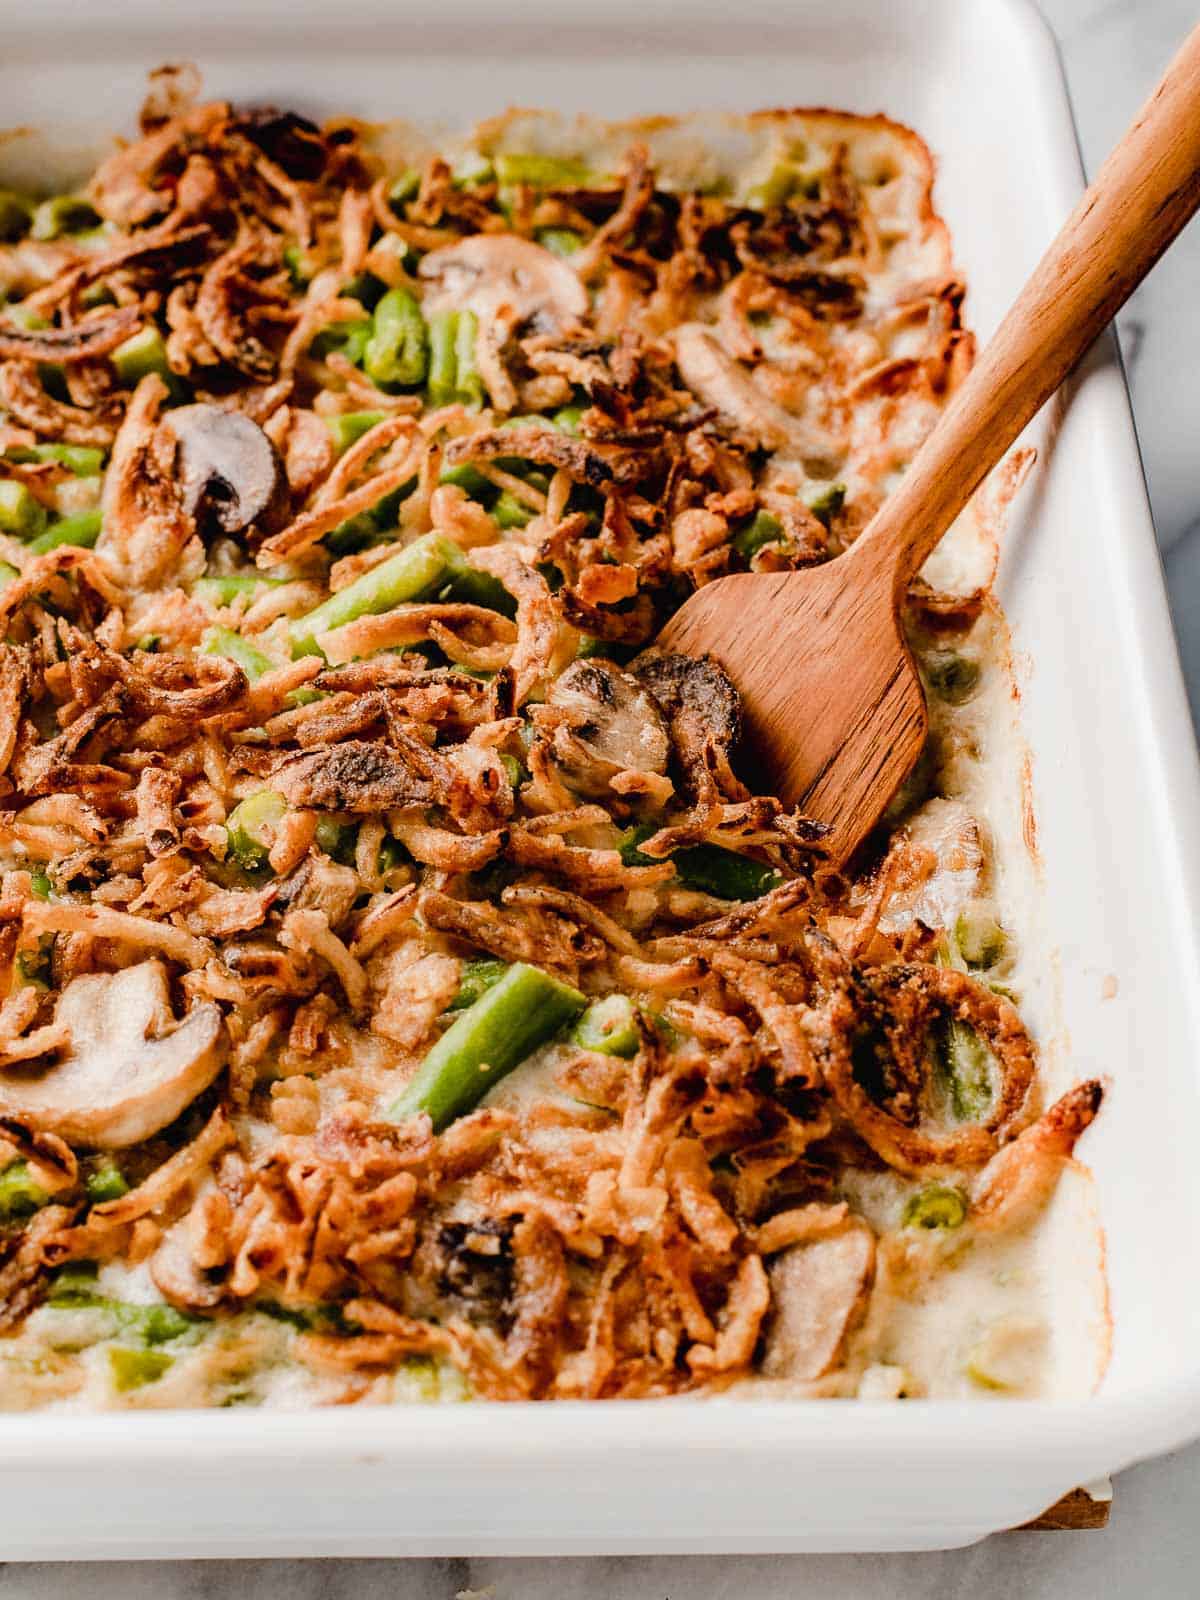 Green bean casserole side dish in a white serving dish topped with fried onions and a wooden spoon in the dish.